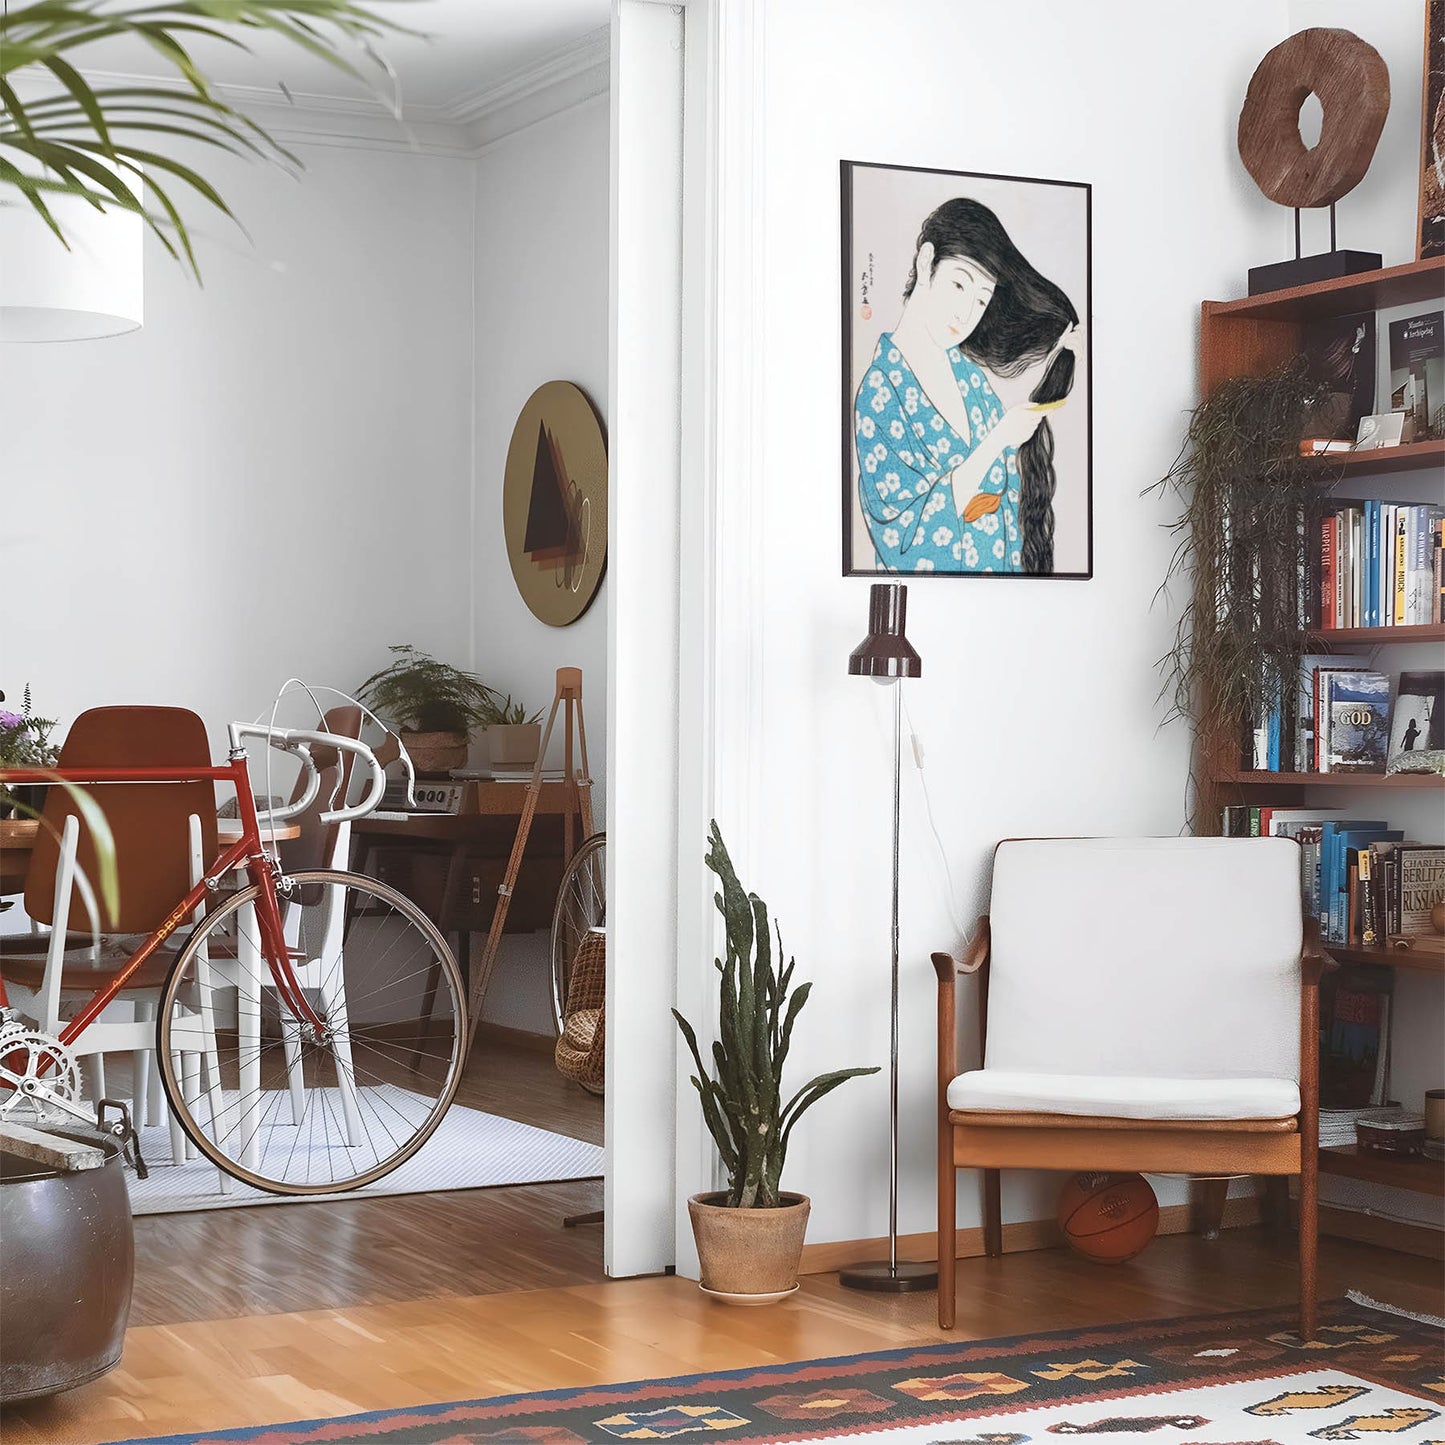 Eclectic living room with a road bike, bookshelf and house plants that features framed artwork of a Blue Flower Kimono above a chair and lamp